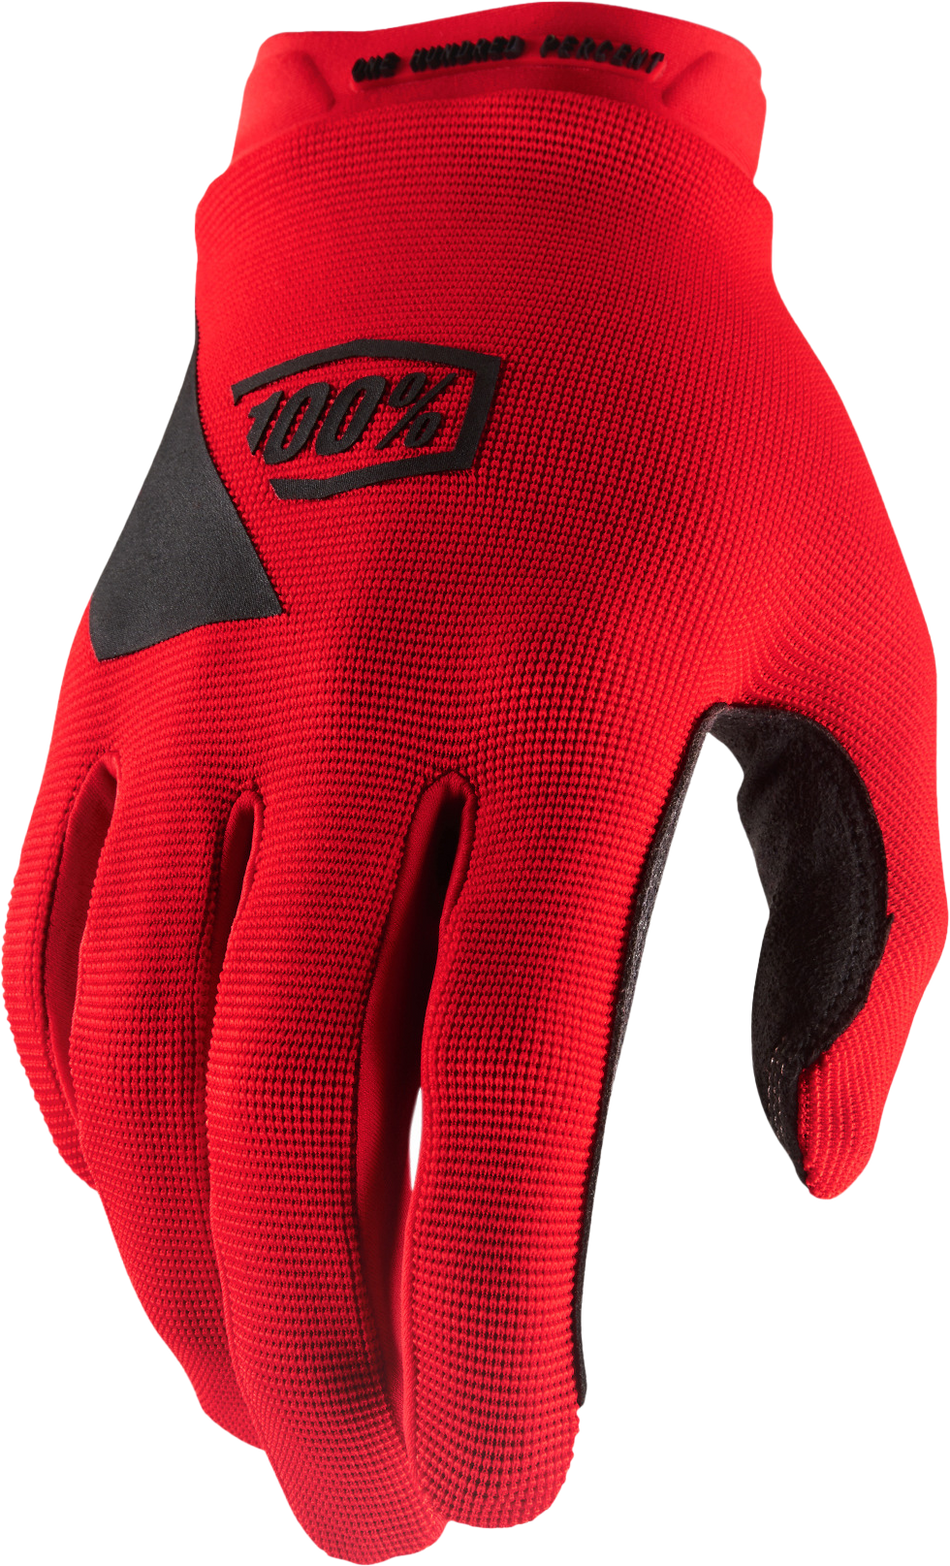 100% Ridecamp Youth Gloves Red Md 10012-00005